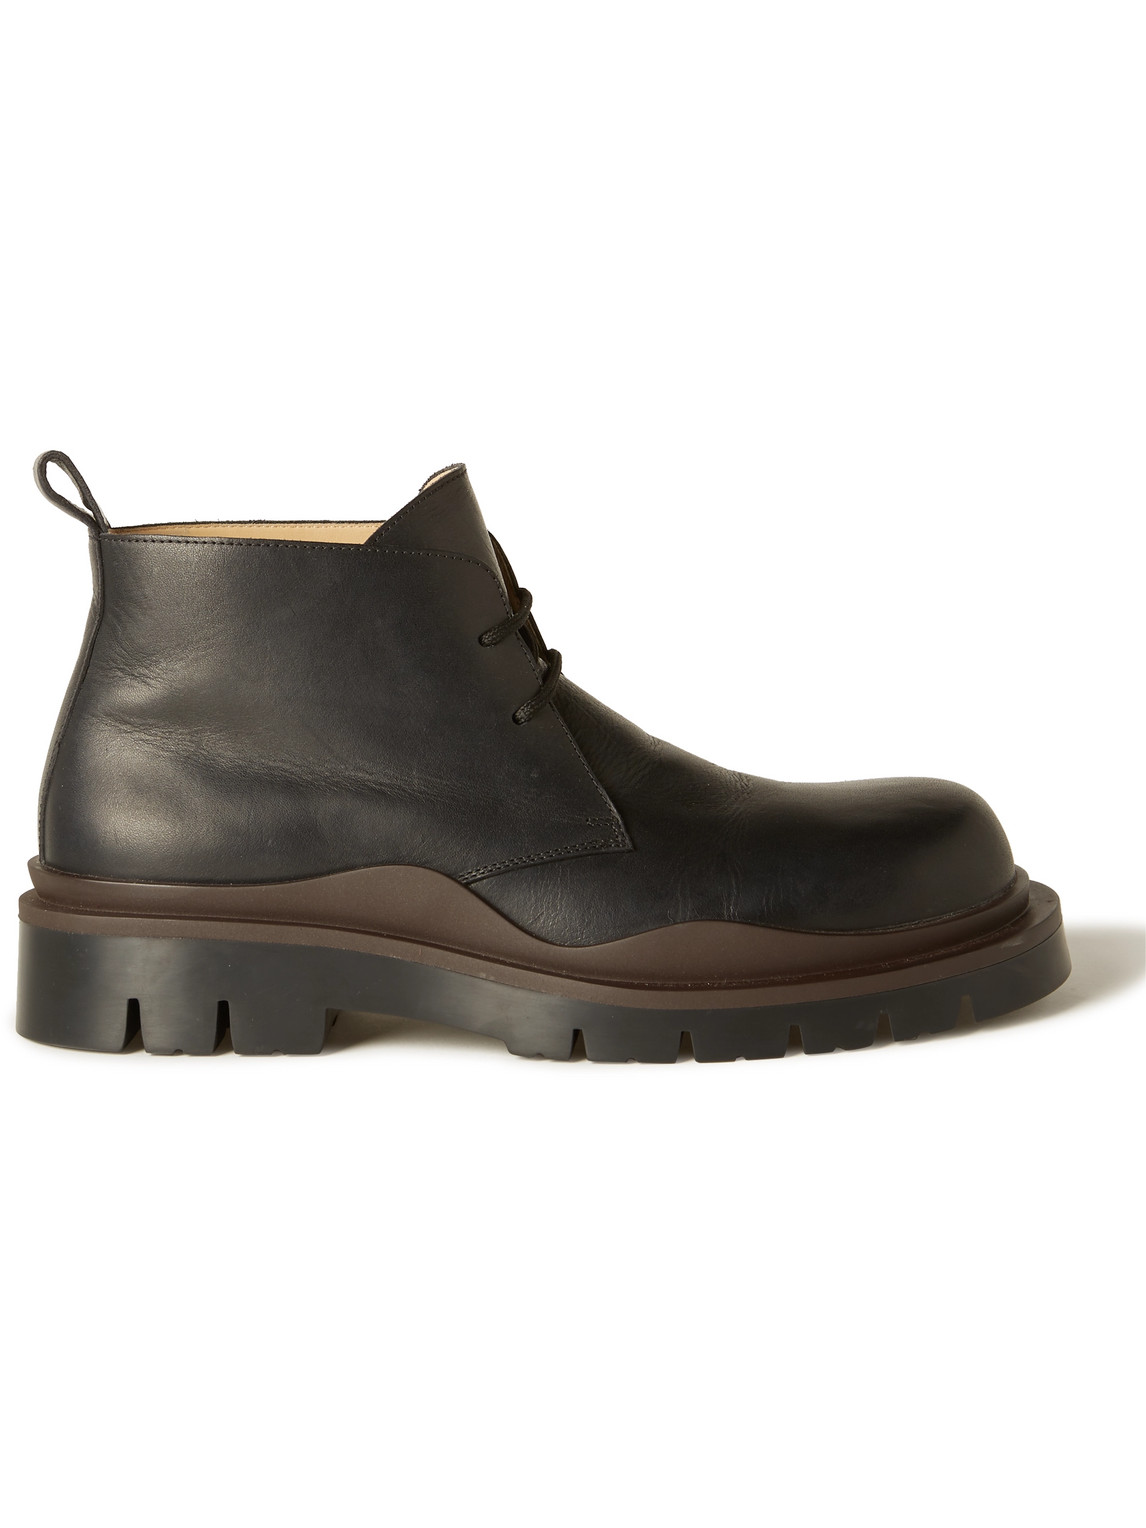 The Tire Rubber-Trimmed Leather Desert Boots